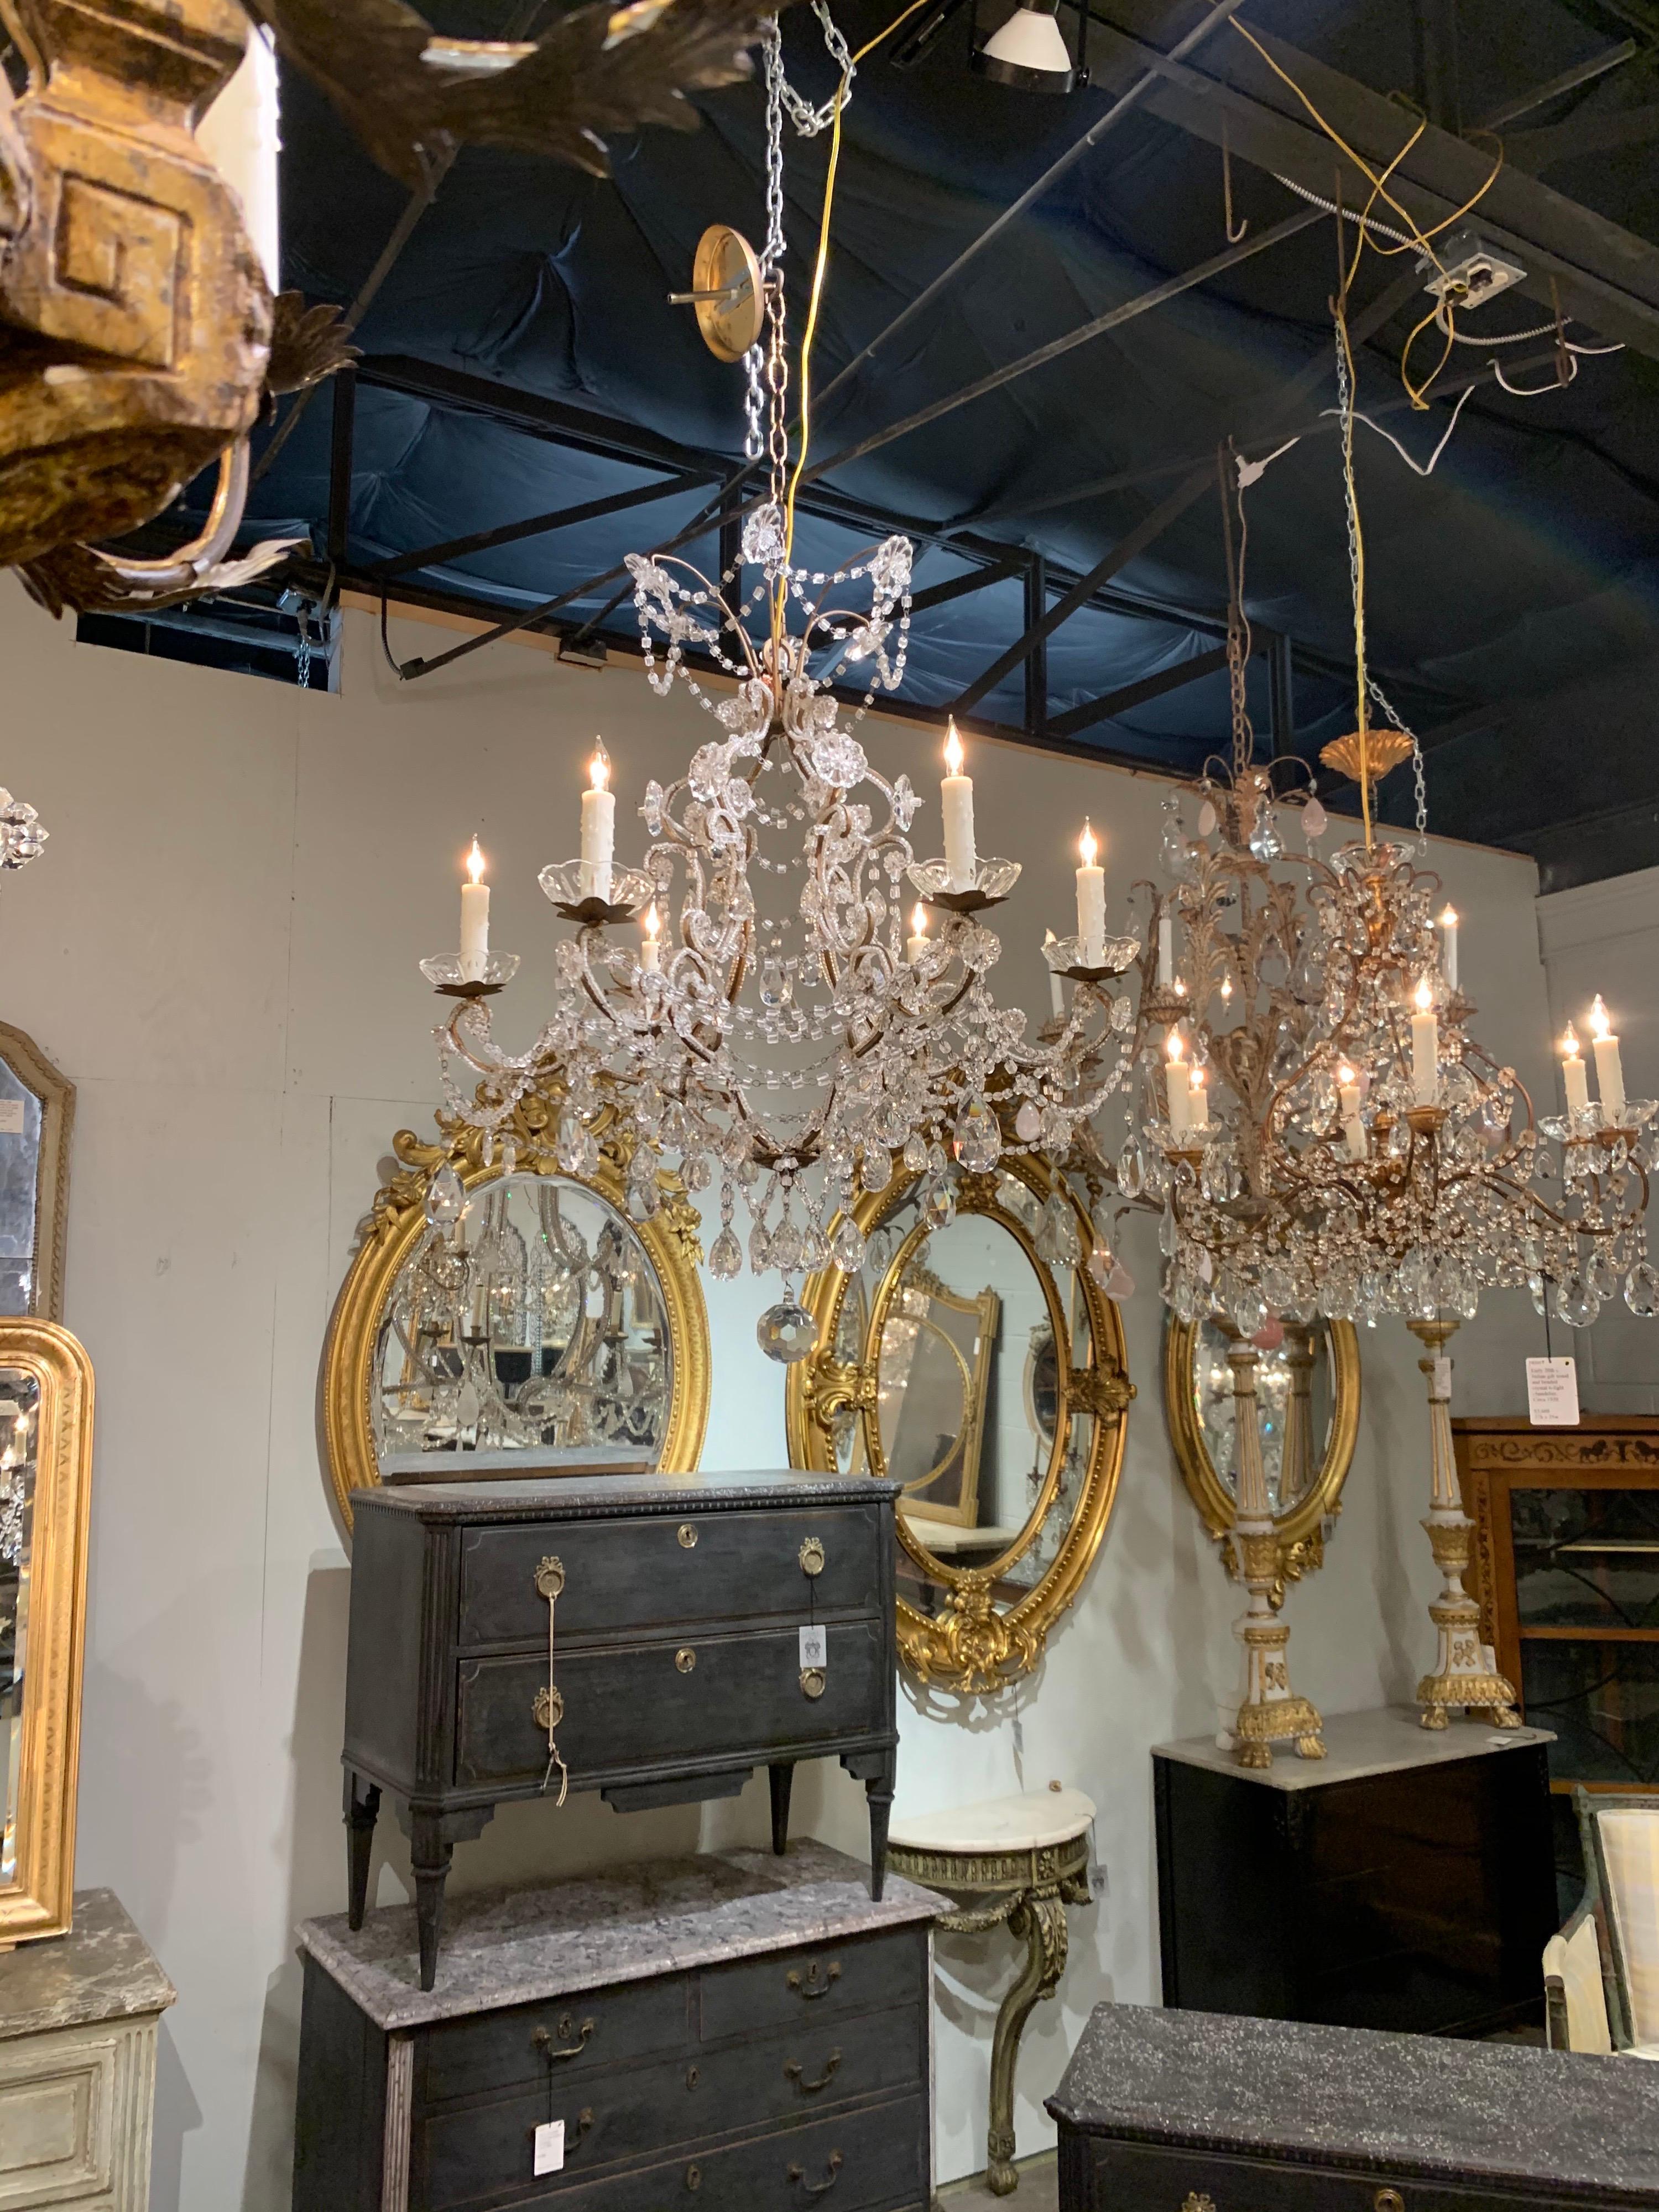 Lovely early 20th century Italian beaded crystal chandelier with 6 lights. Featuring a beautiful beaded base, along with an array of gorgeous crystals and flowers. So pretty!